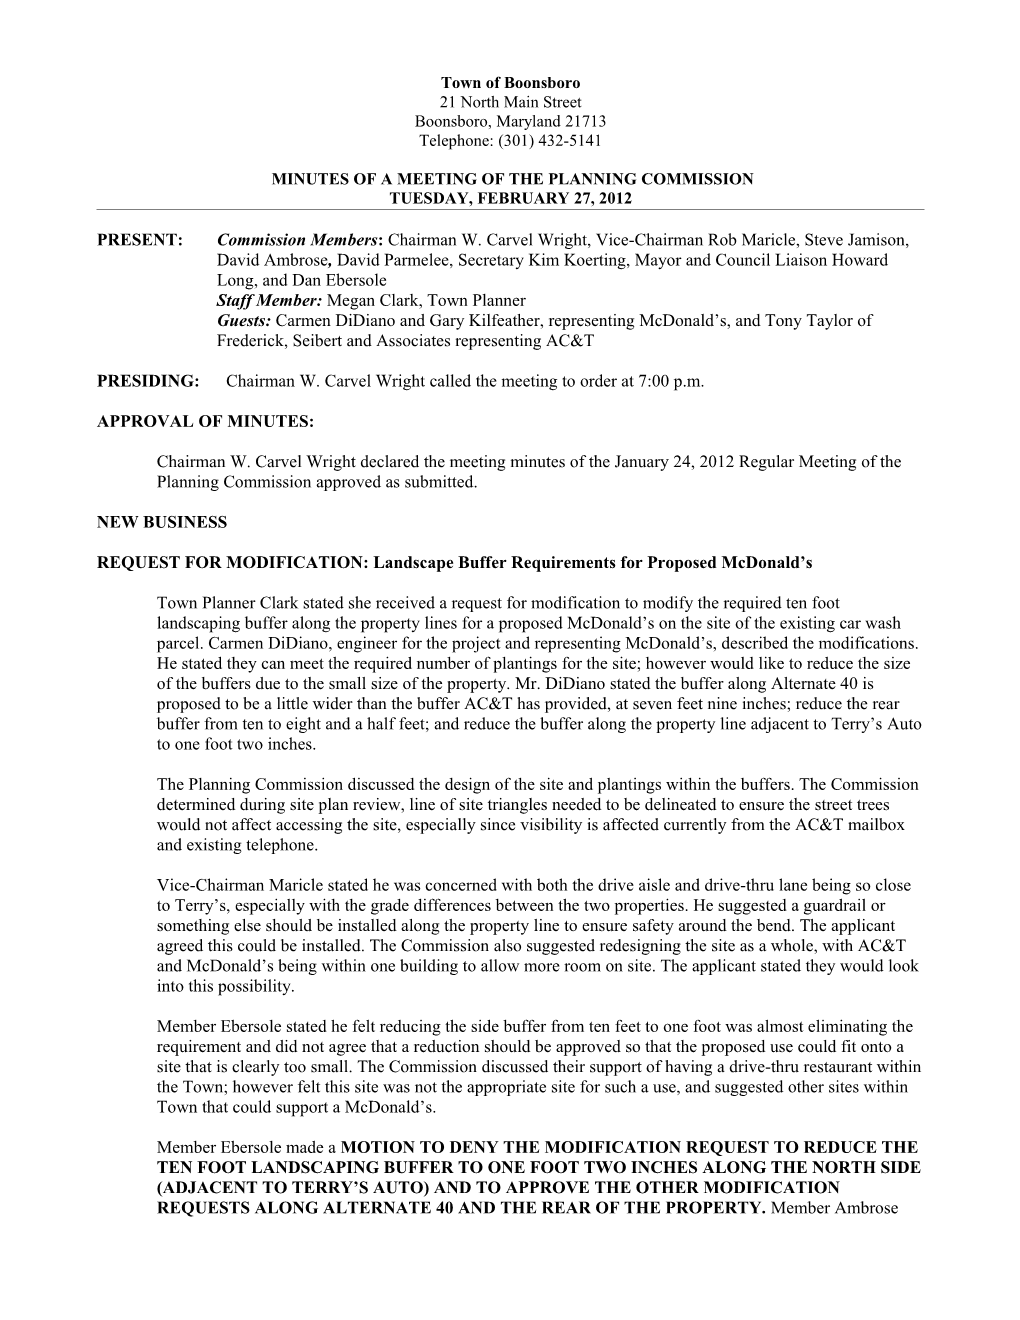 Boonsboro Planning Commission Minutes s3